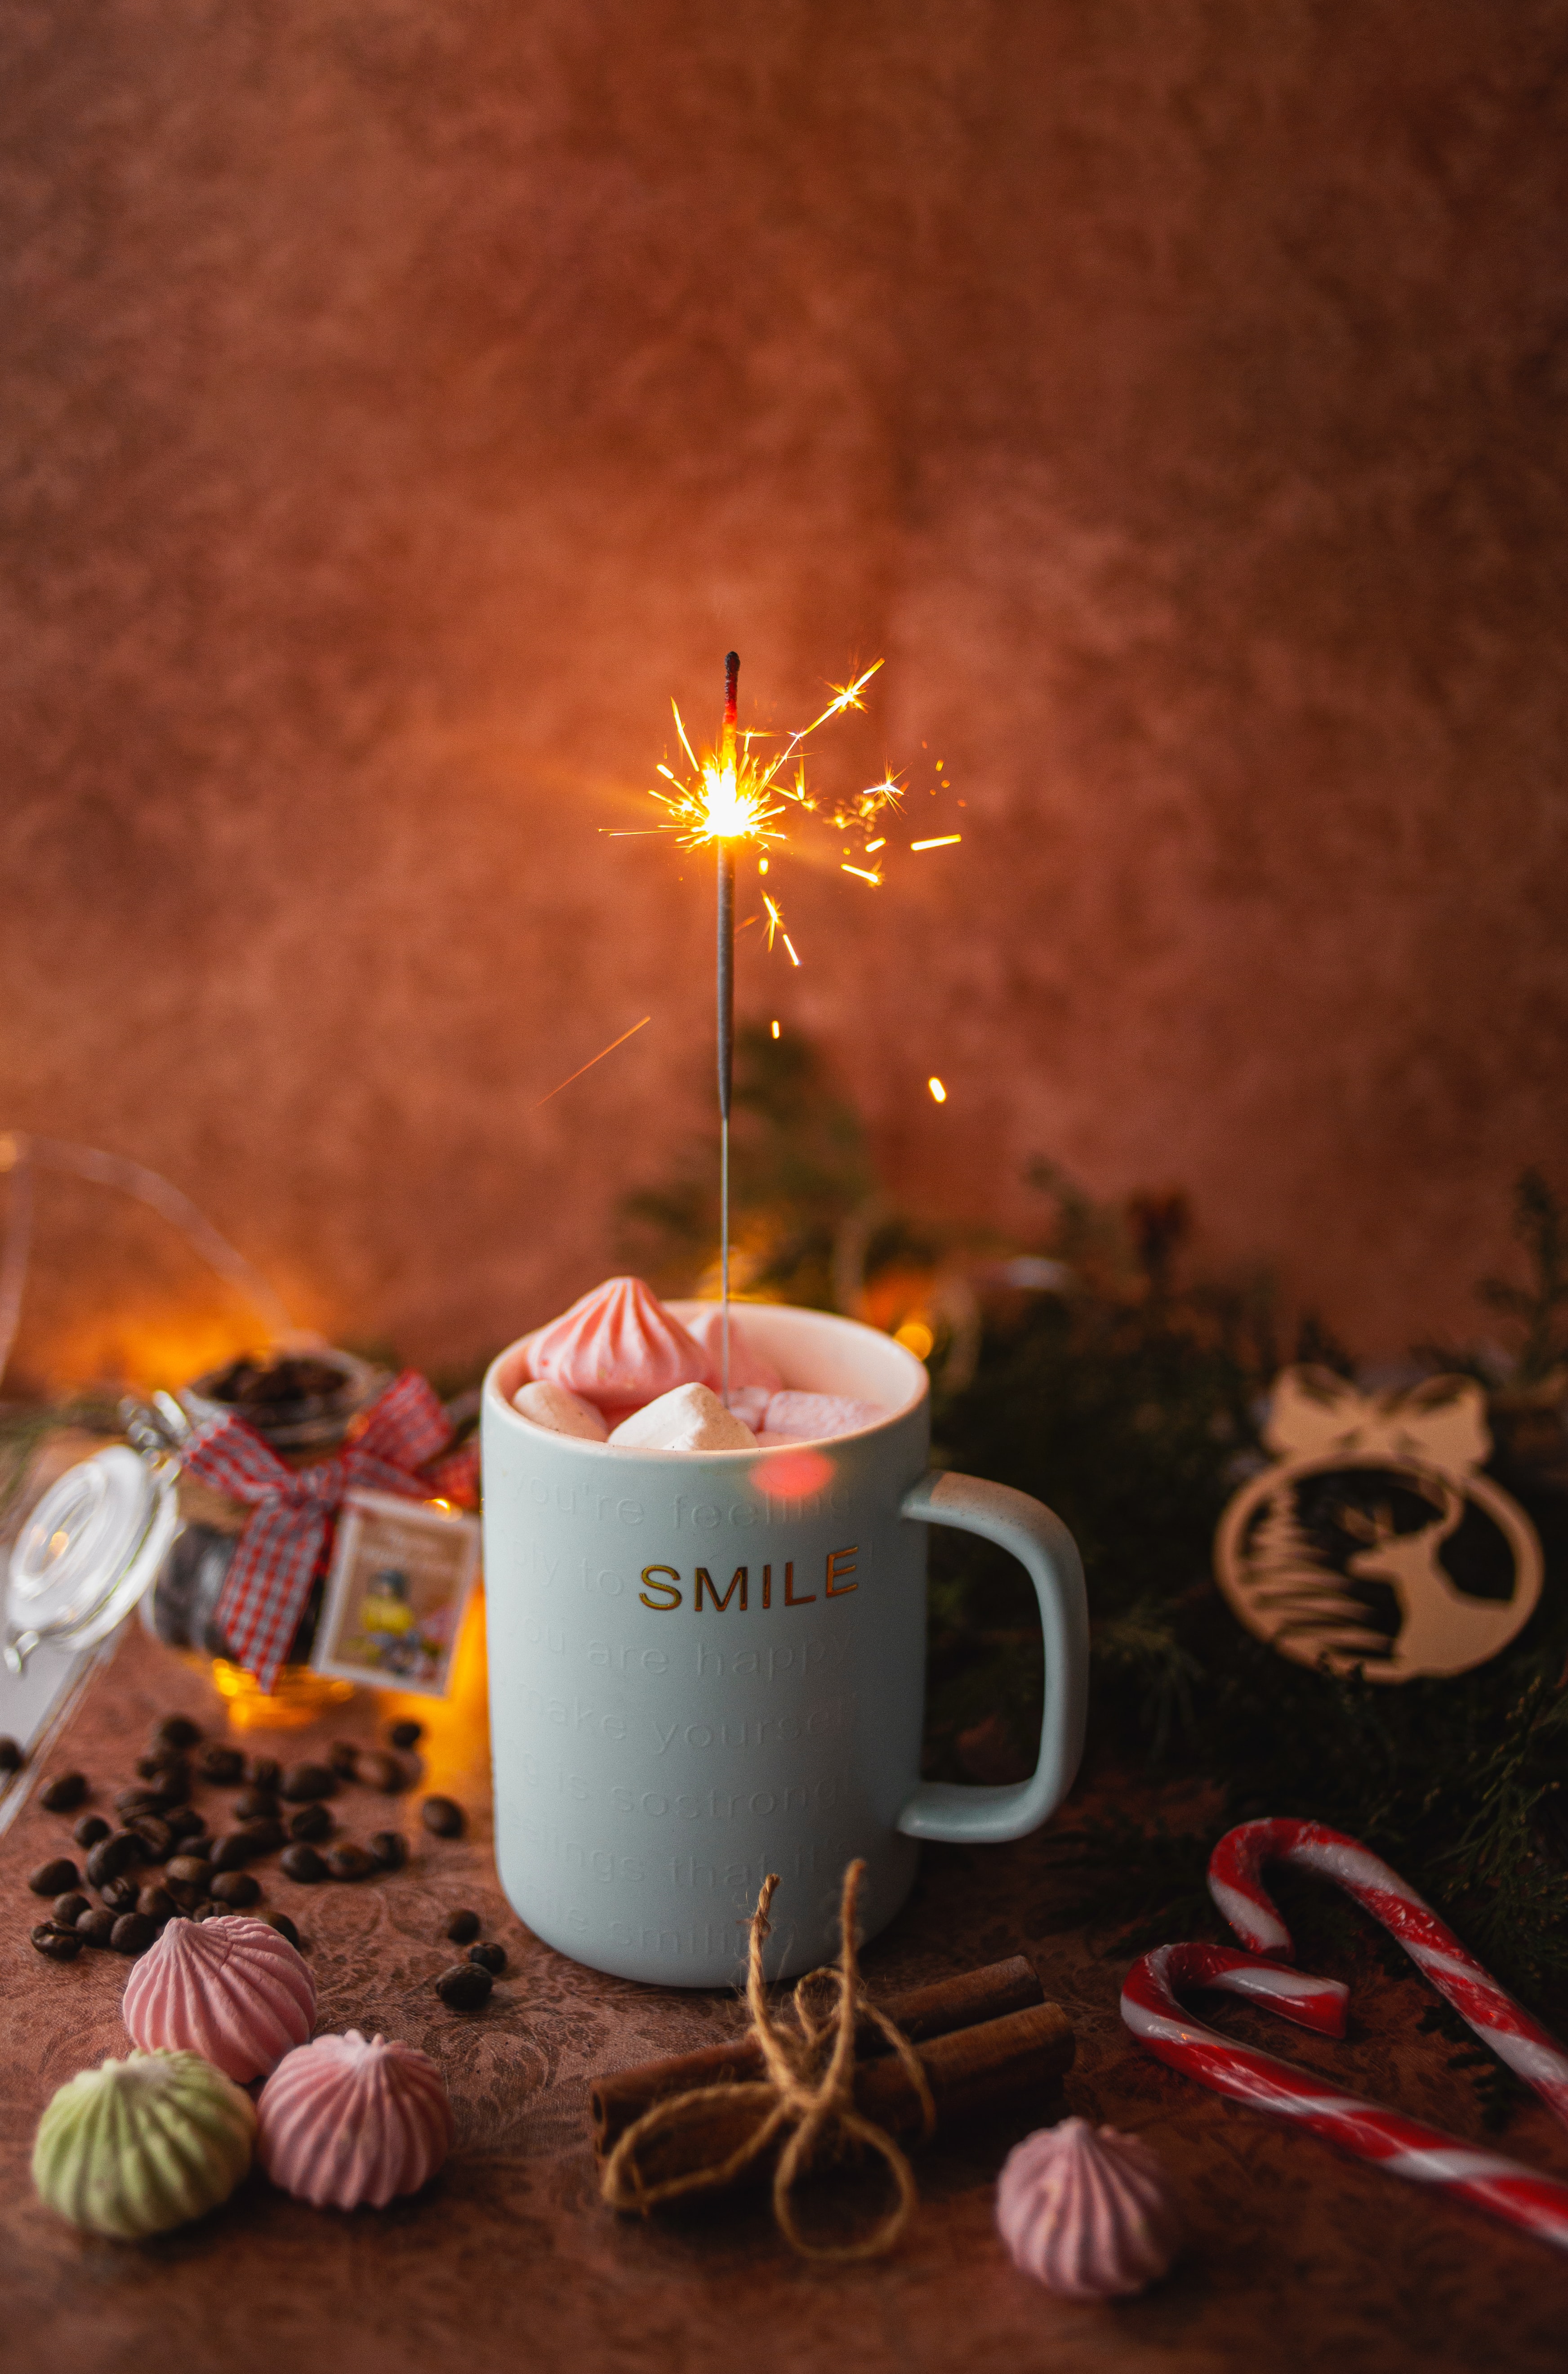 android mug, miscellanea, cup, holiday, sparks, miscellaneous, marshmallow, bengal lights, sparklers, zephyr